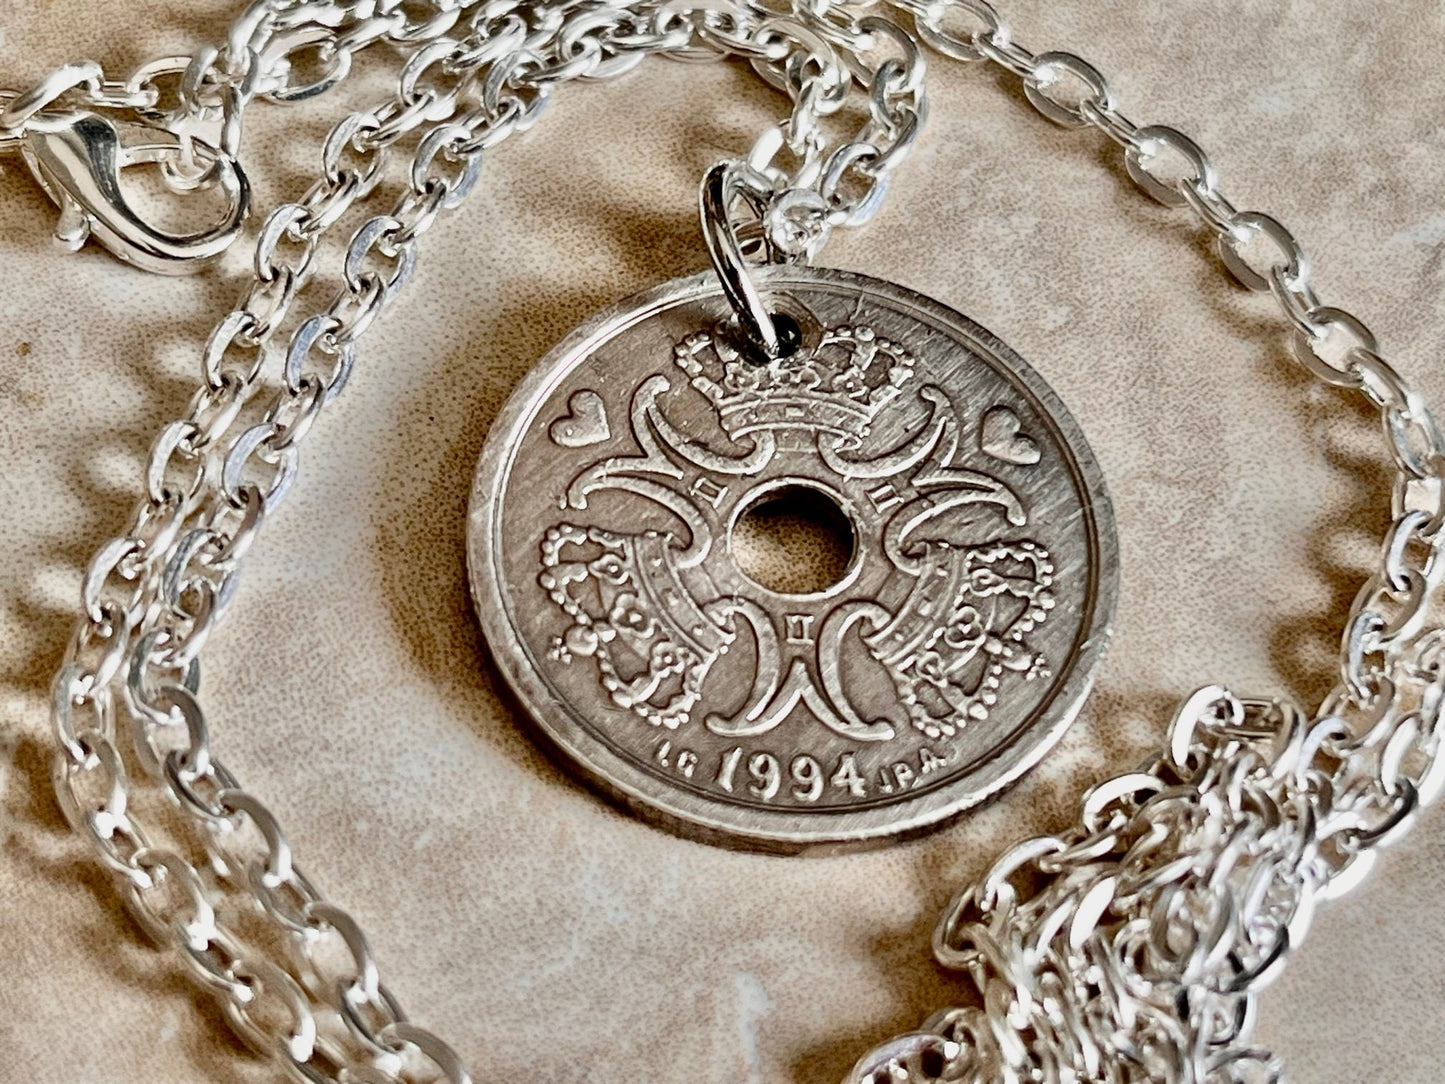 Denmark Coin Necklace Pendant 2 Kroner Danmark Jewelry Personal Vintage Handmade Jewelry Gift Friend Charm For Him Her World Coin Collector